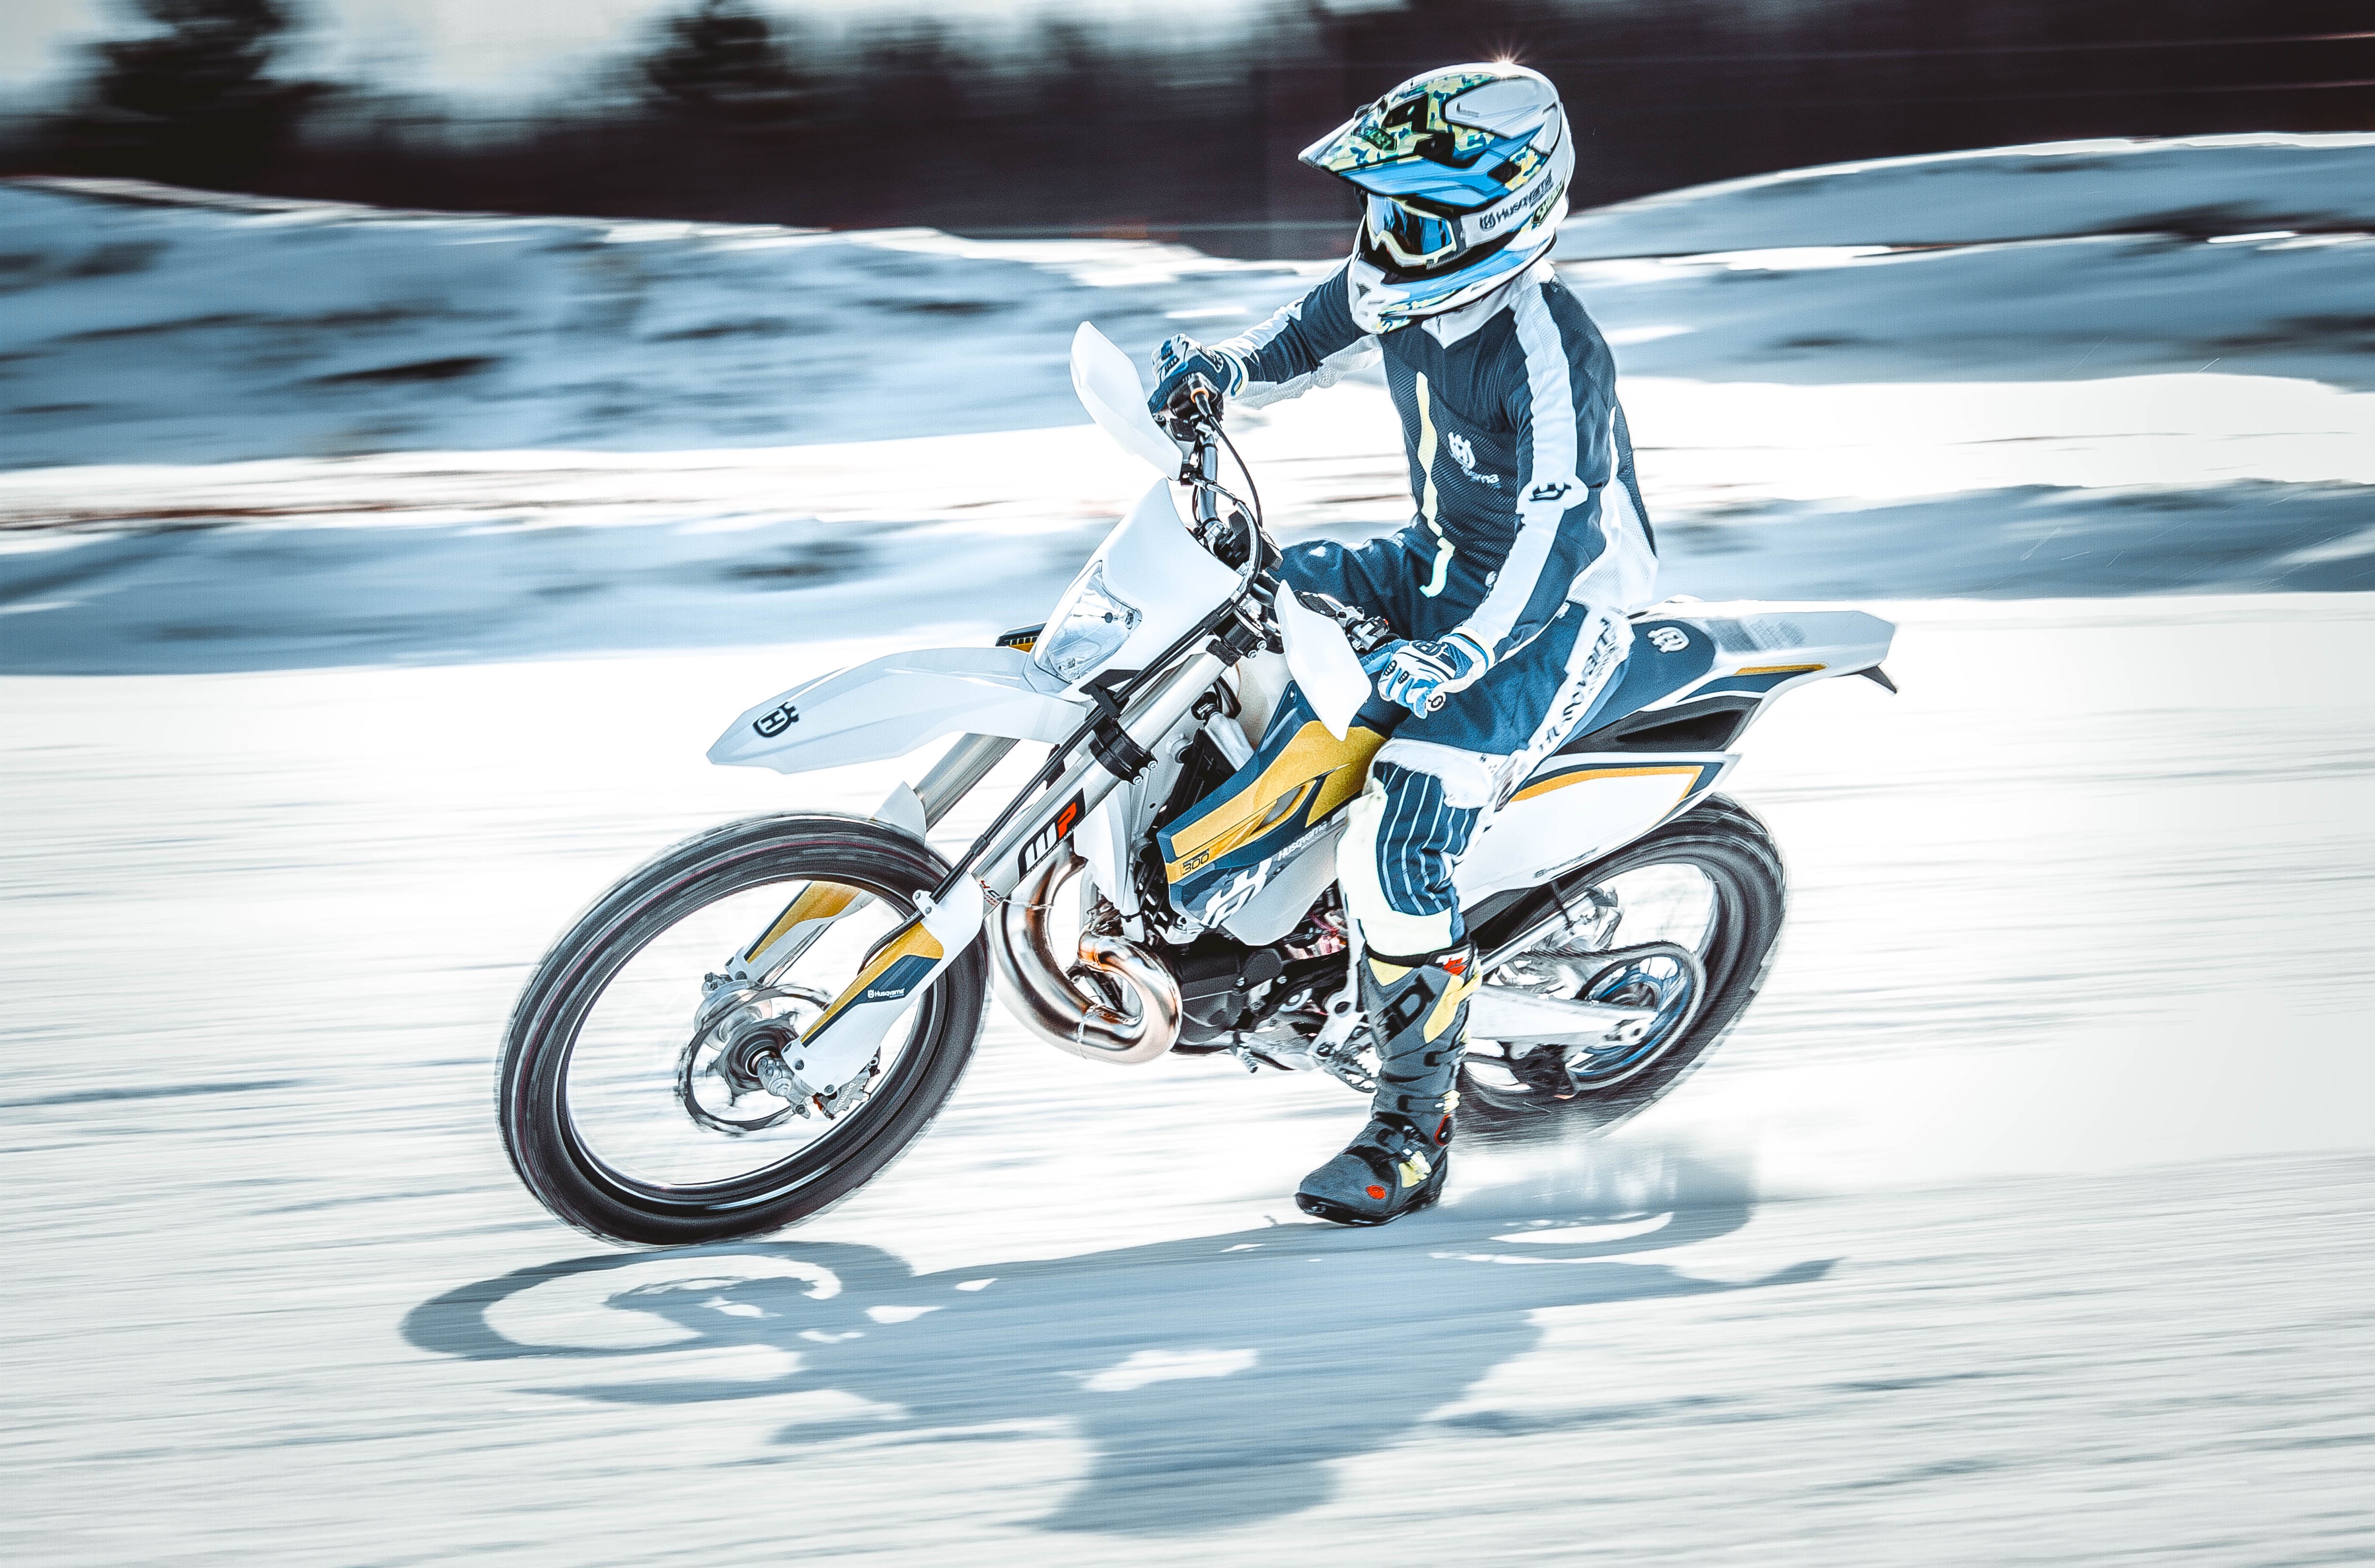 speed, motorcycles, snow, motorcyclist